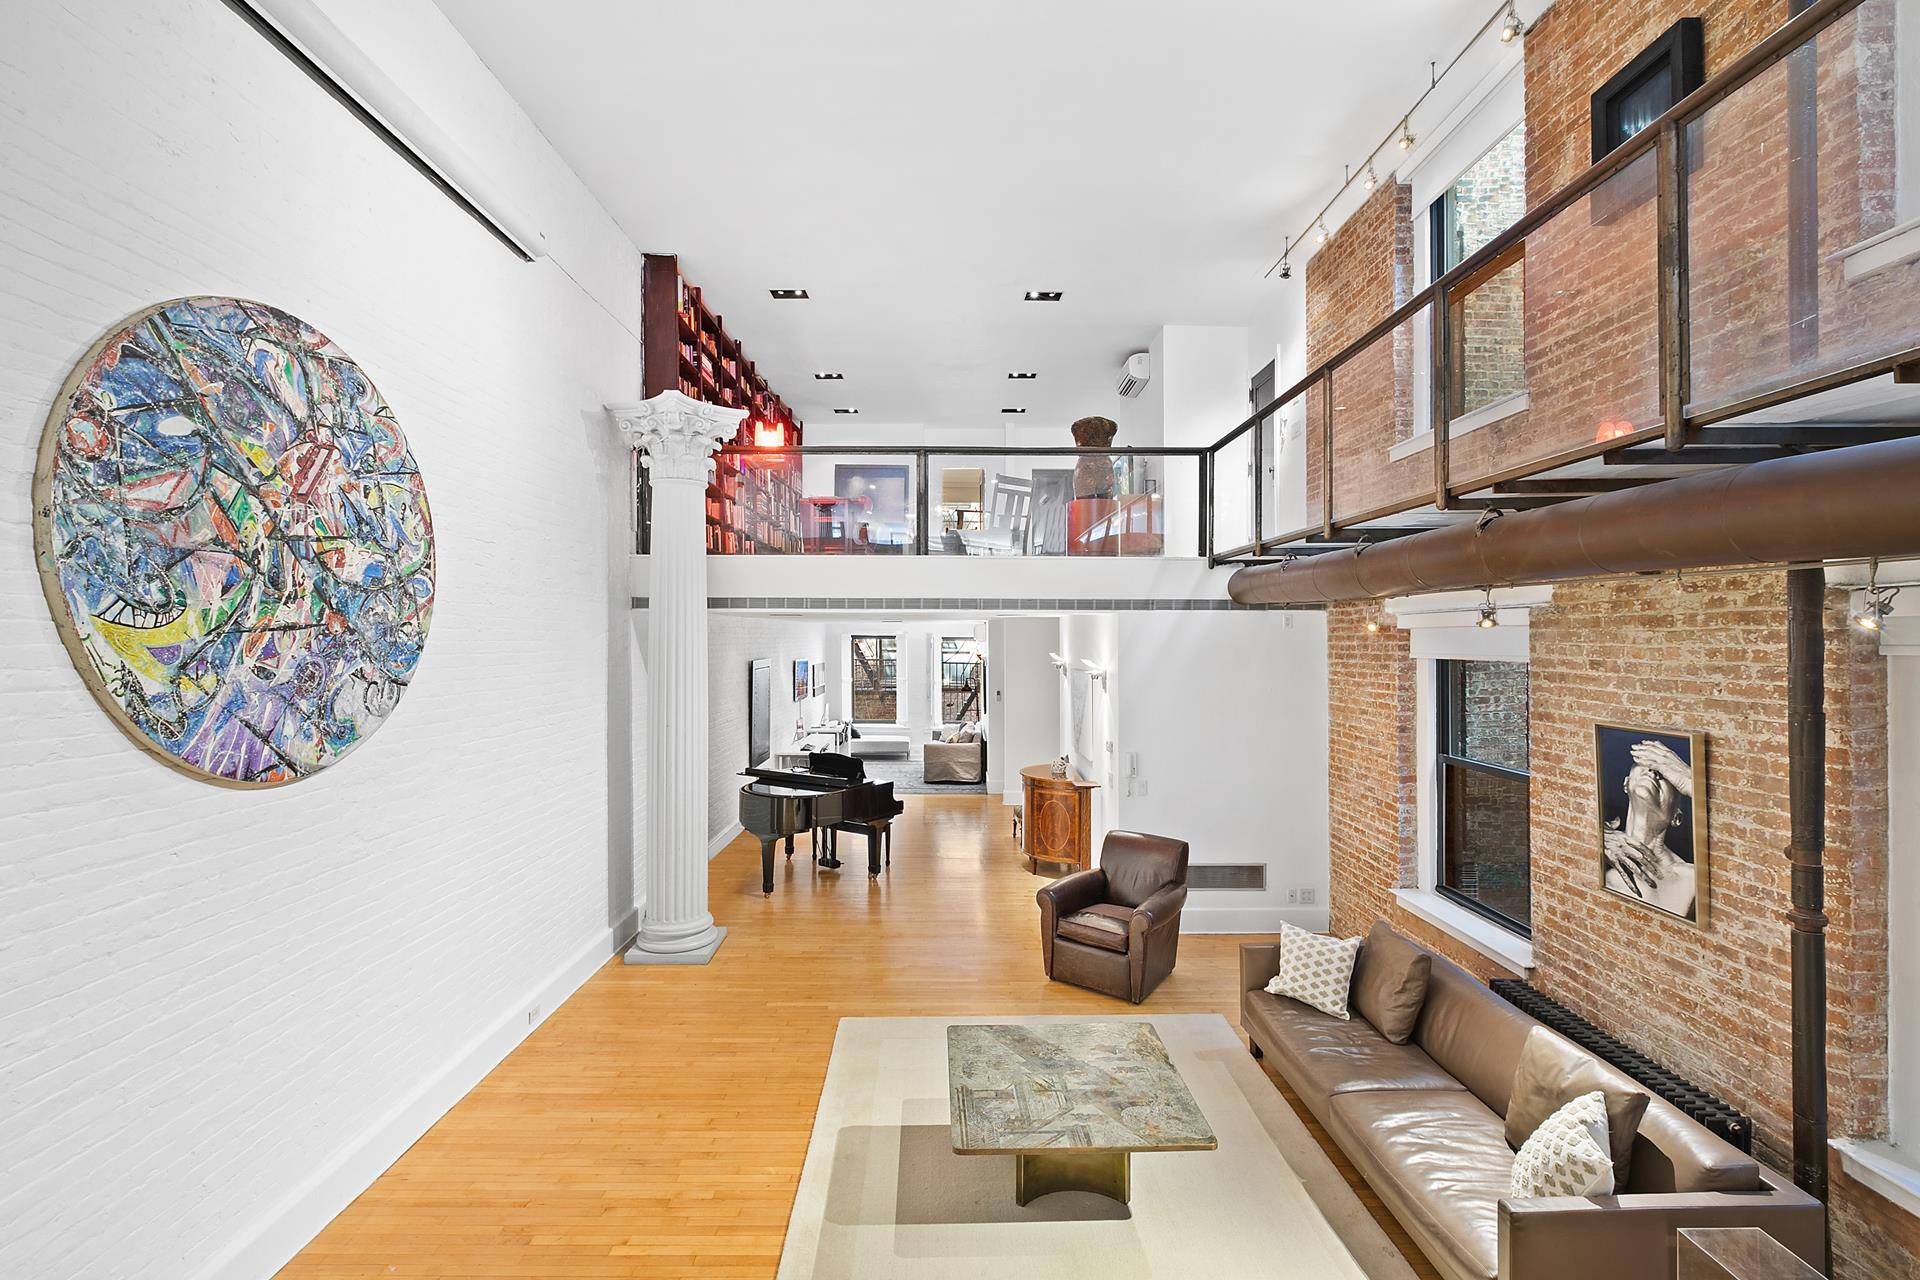 At more than four thousand square feet, dramatic double height ceilings greet you in this former choreographer's five bedroom duplex loft with central air conditioning and private laundry.